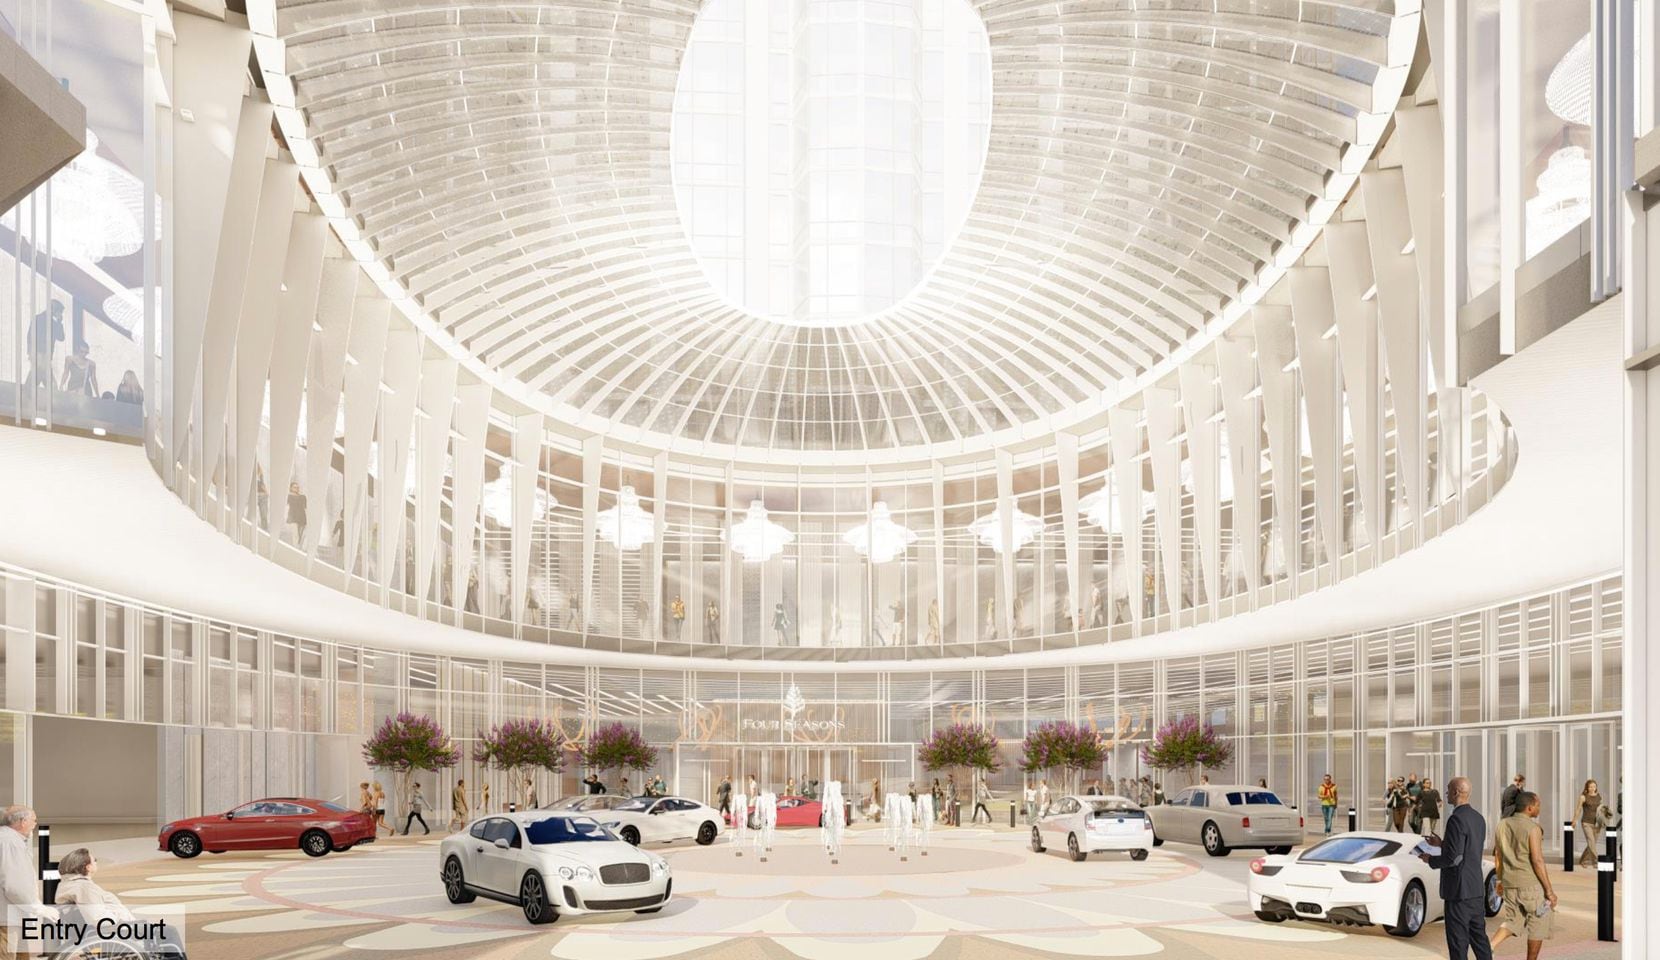 Plans for the Four Seasons tower include an elaborate circular entryway facing Turtle Creek.